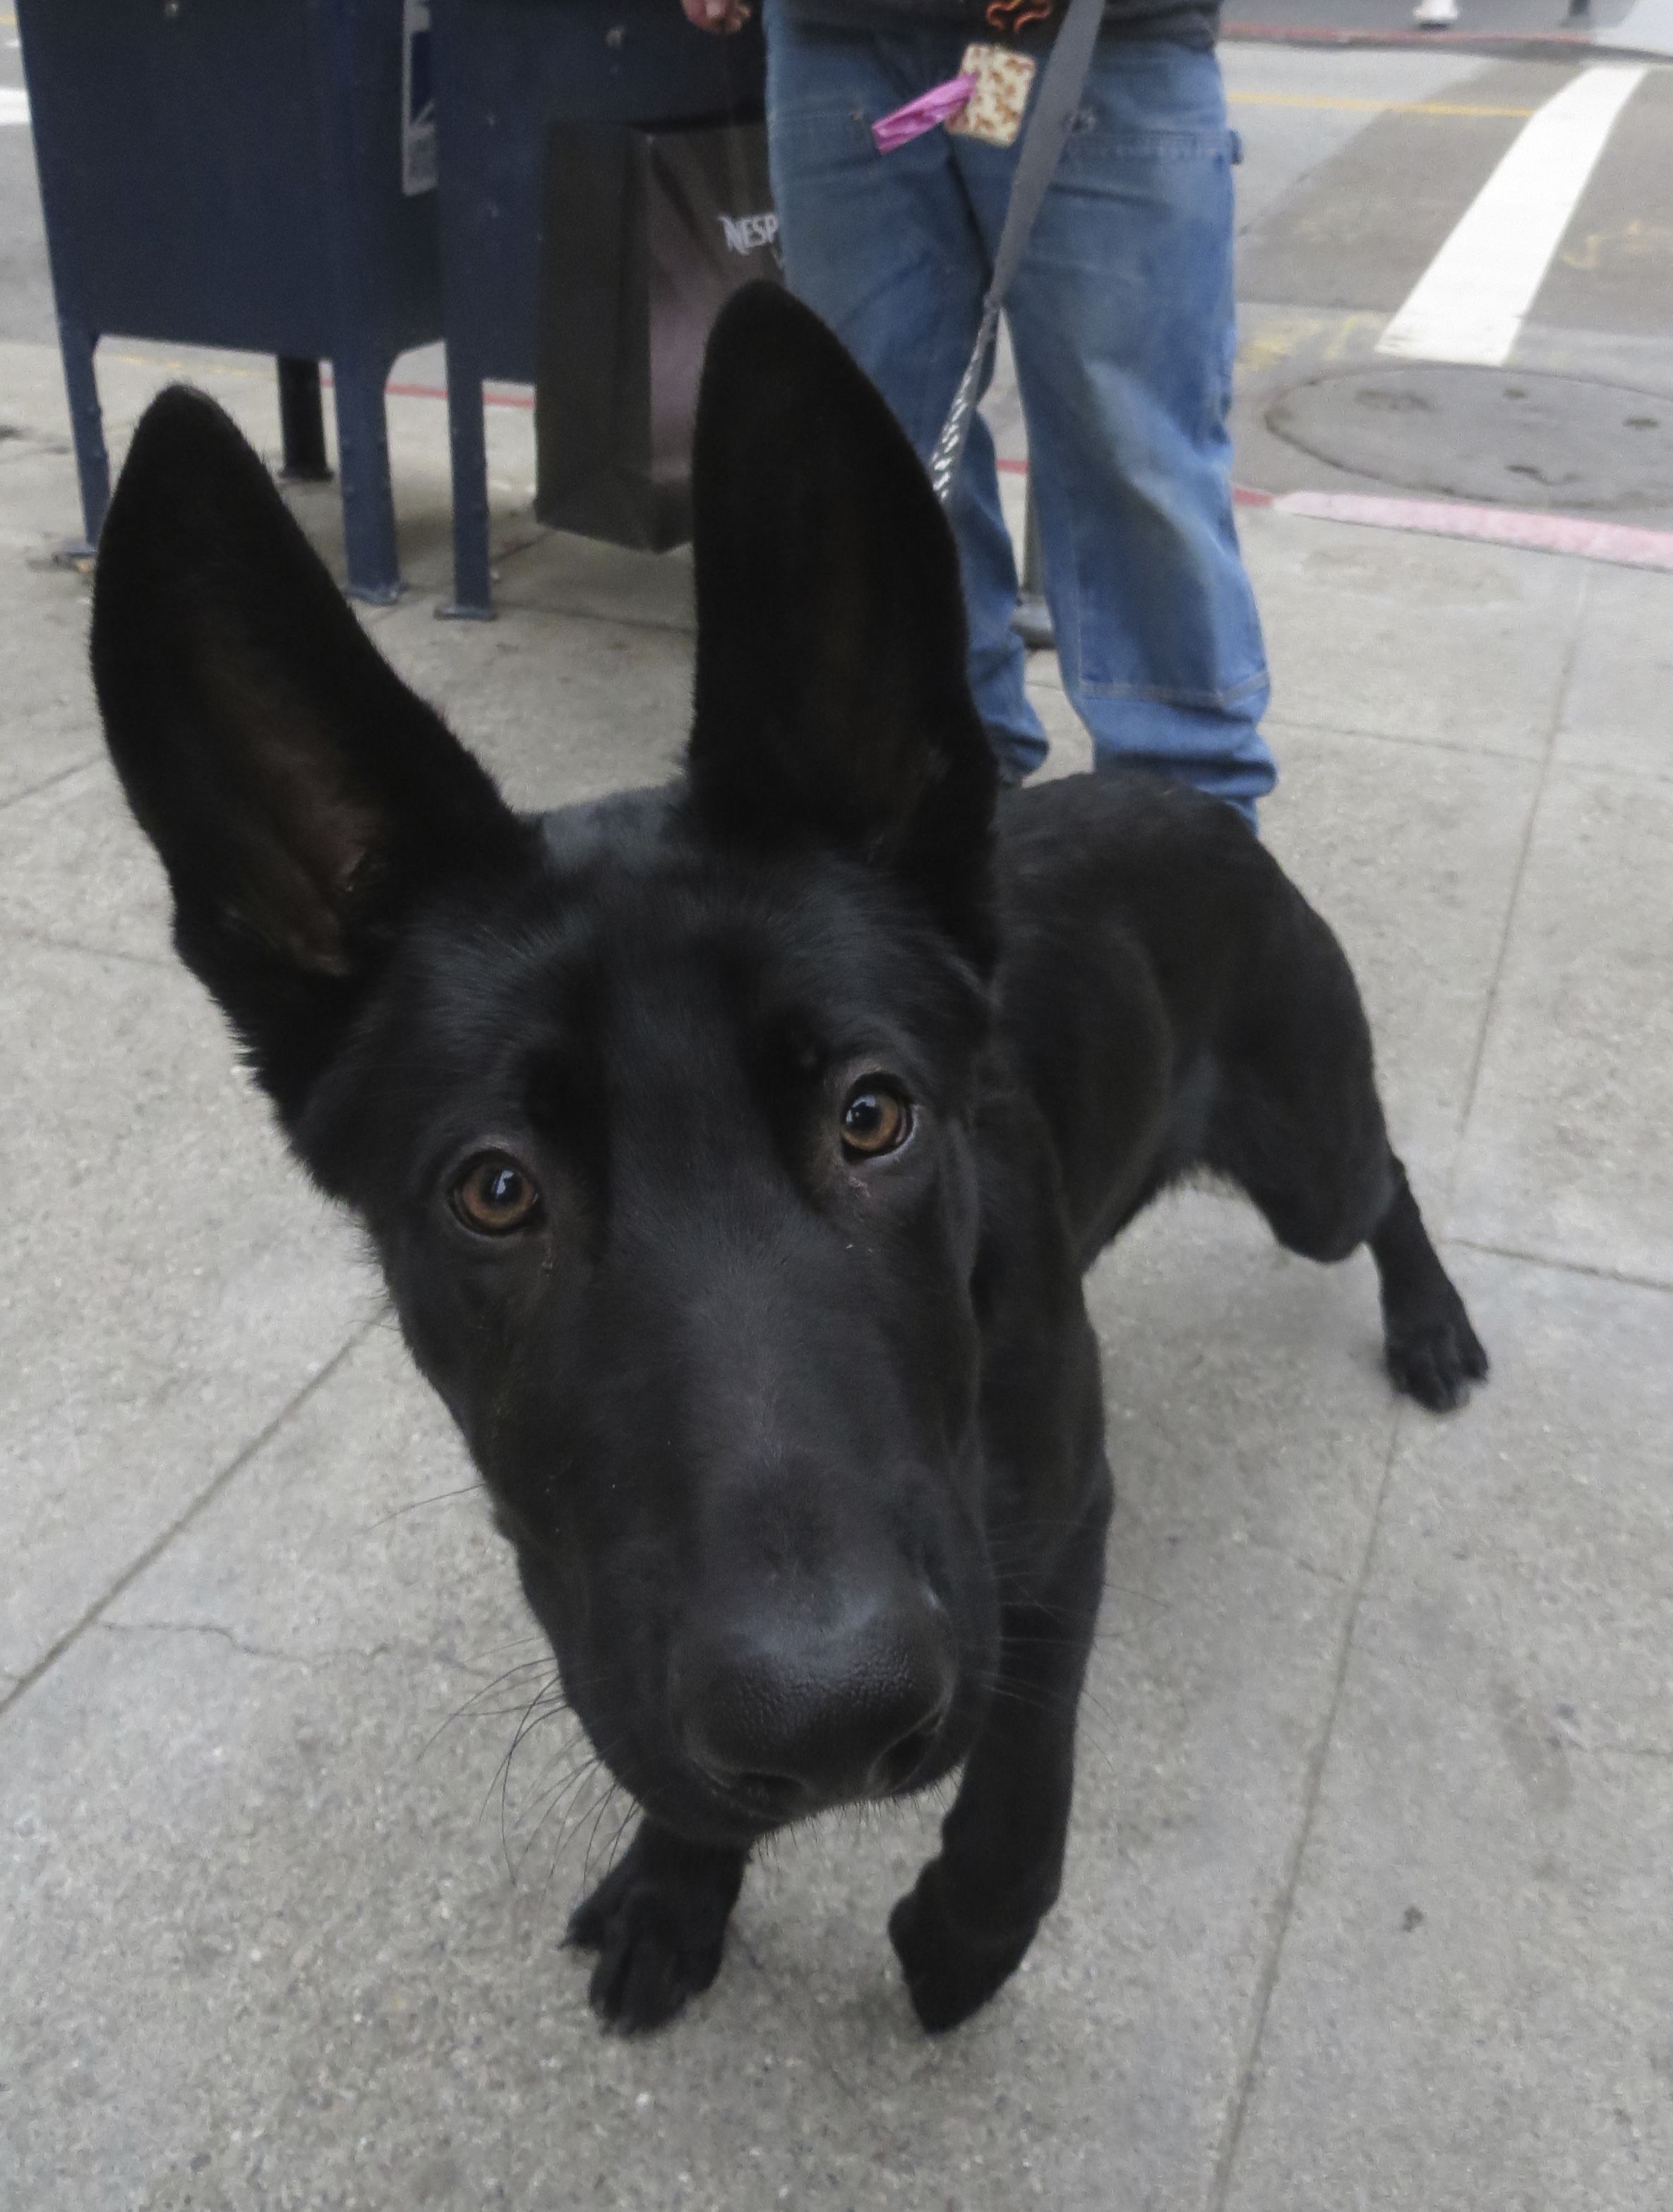 Young Black German Shepherd With Humongous Ears Staring Curiously Into Camera